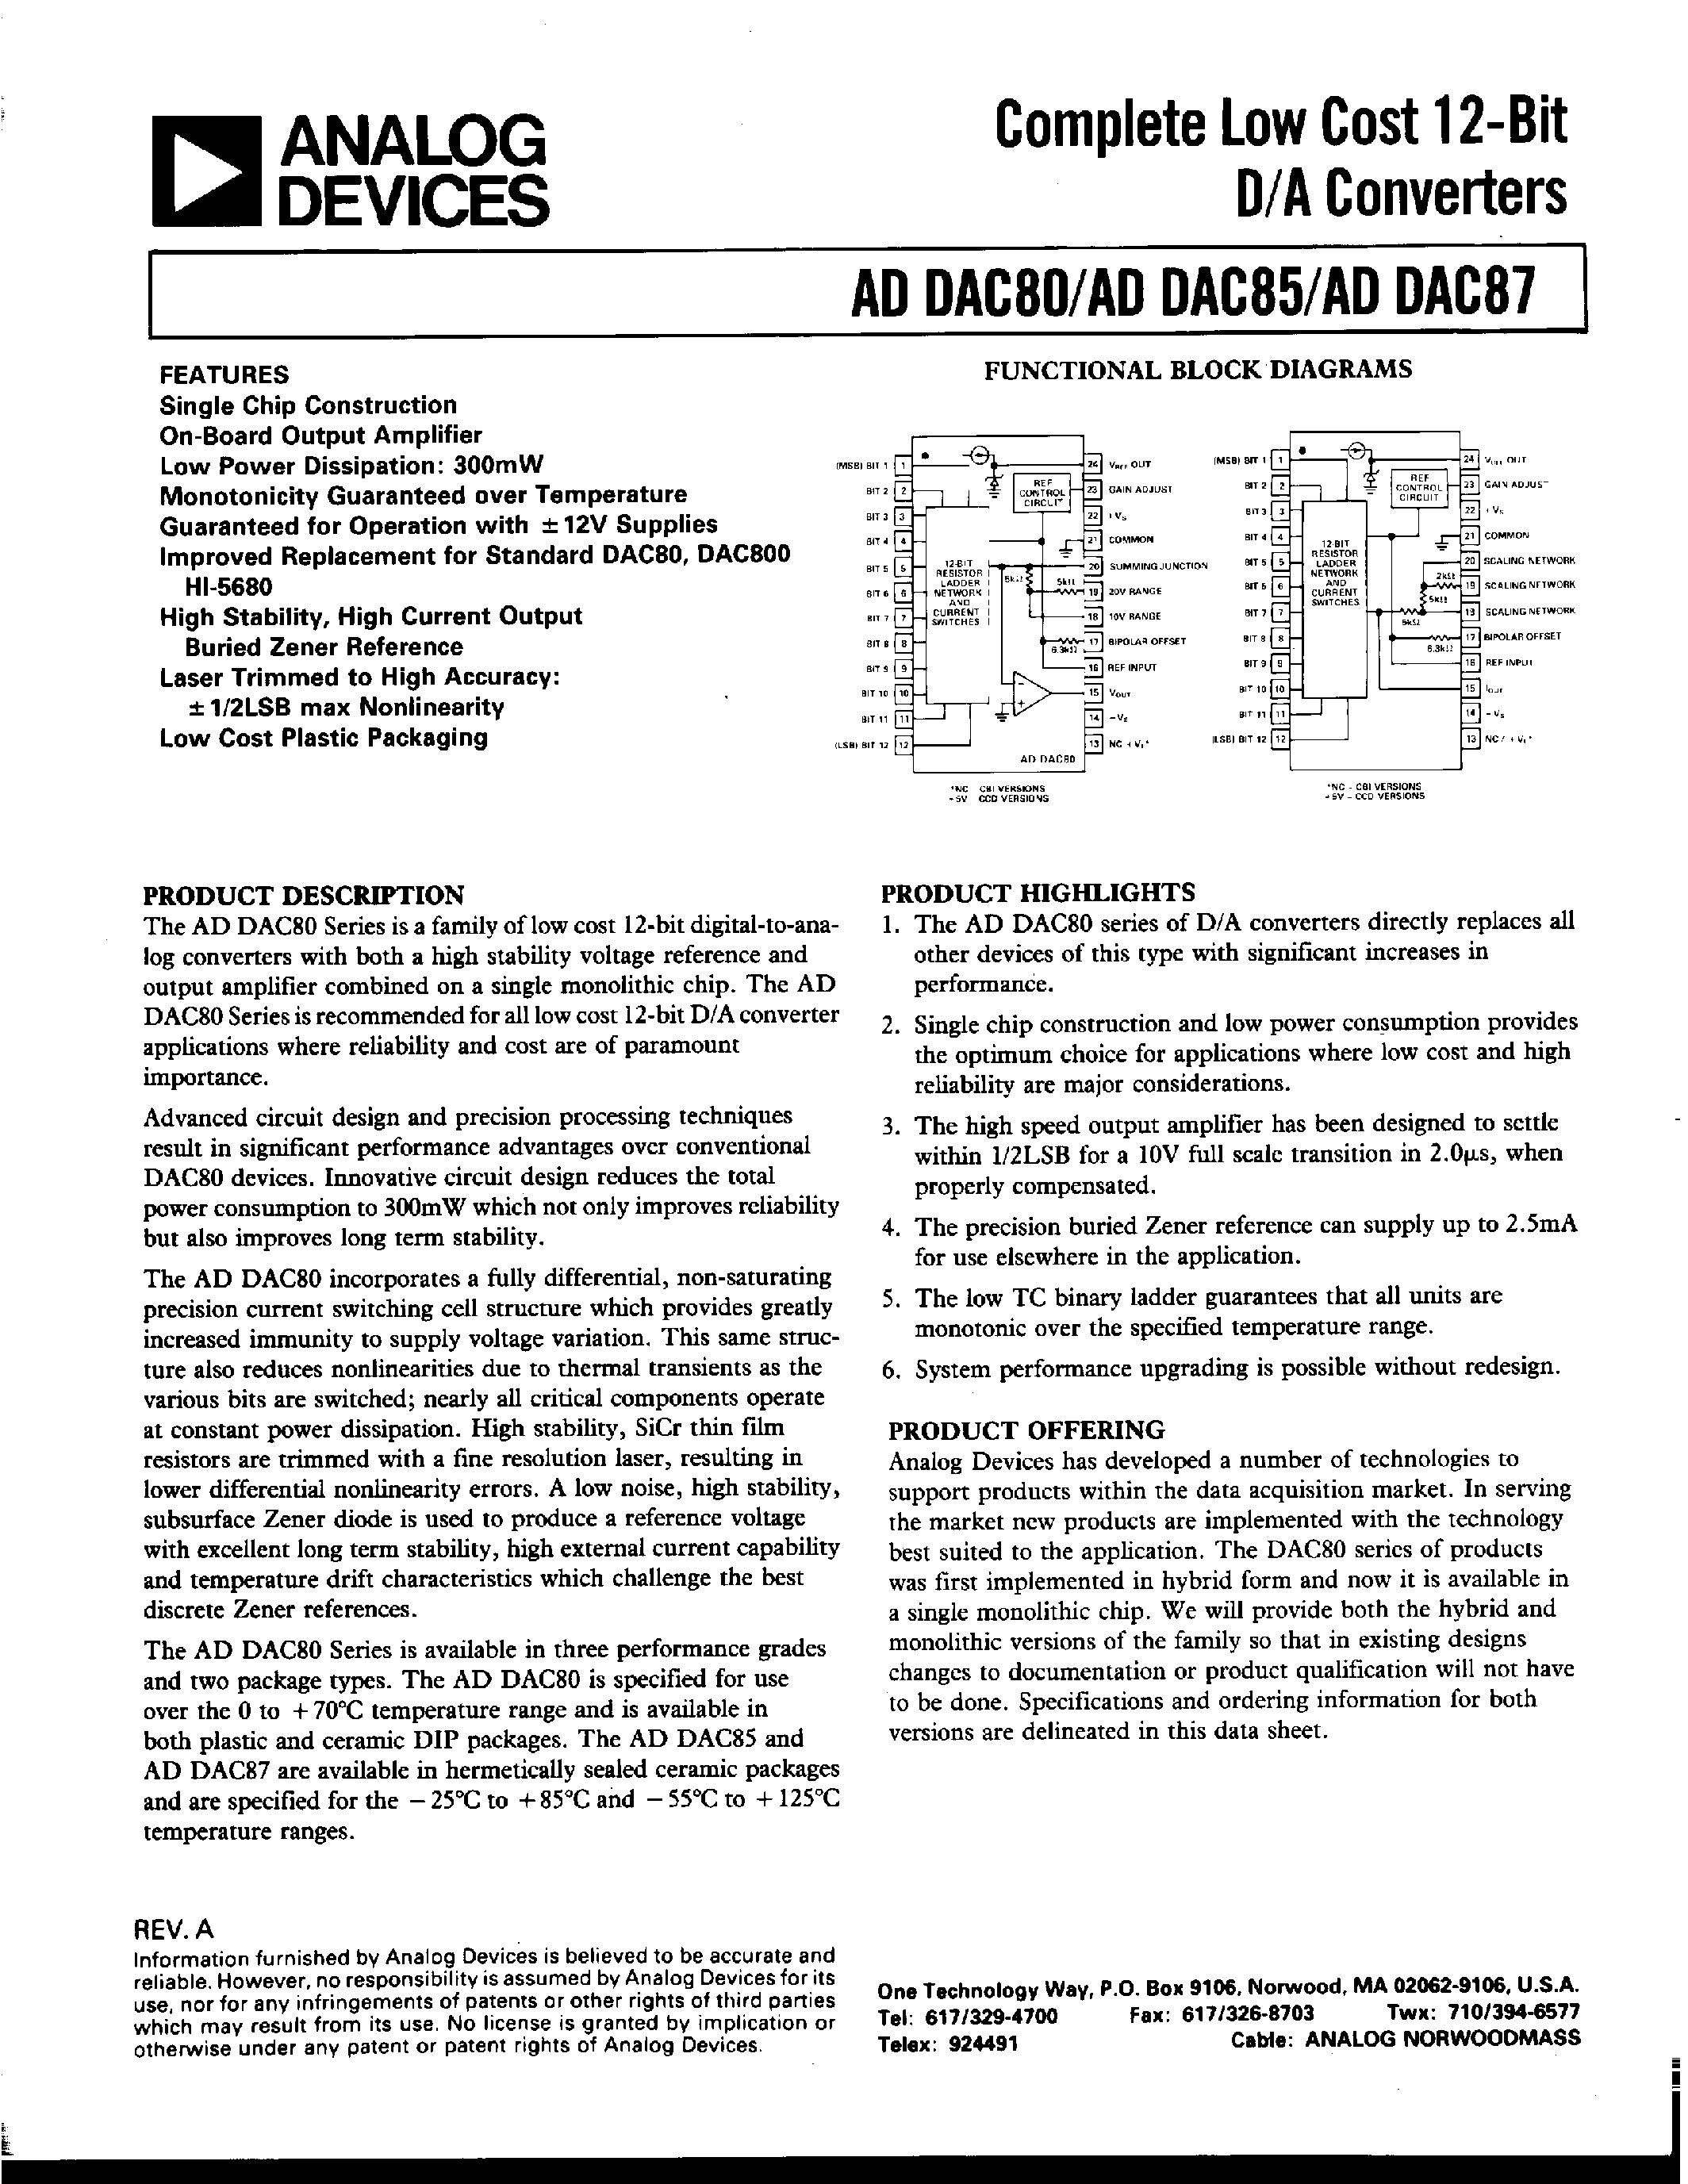 Datasheet ADDAC87-CBI-V - COMPLETE LOW COST 12-BIT D/A CONVERTERS page 1